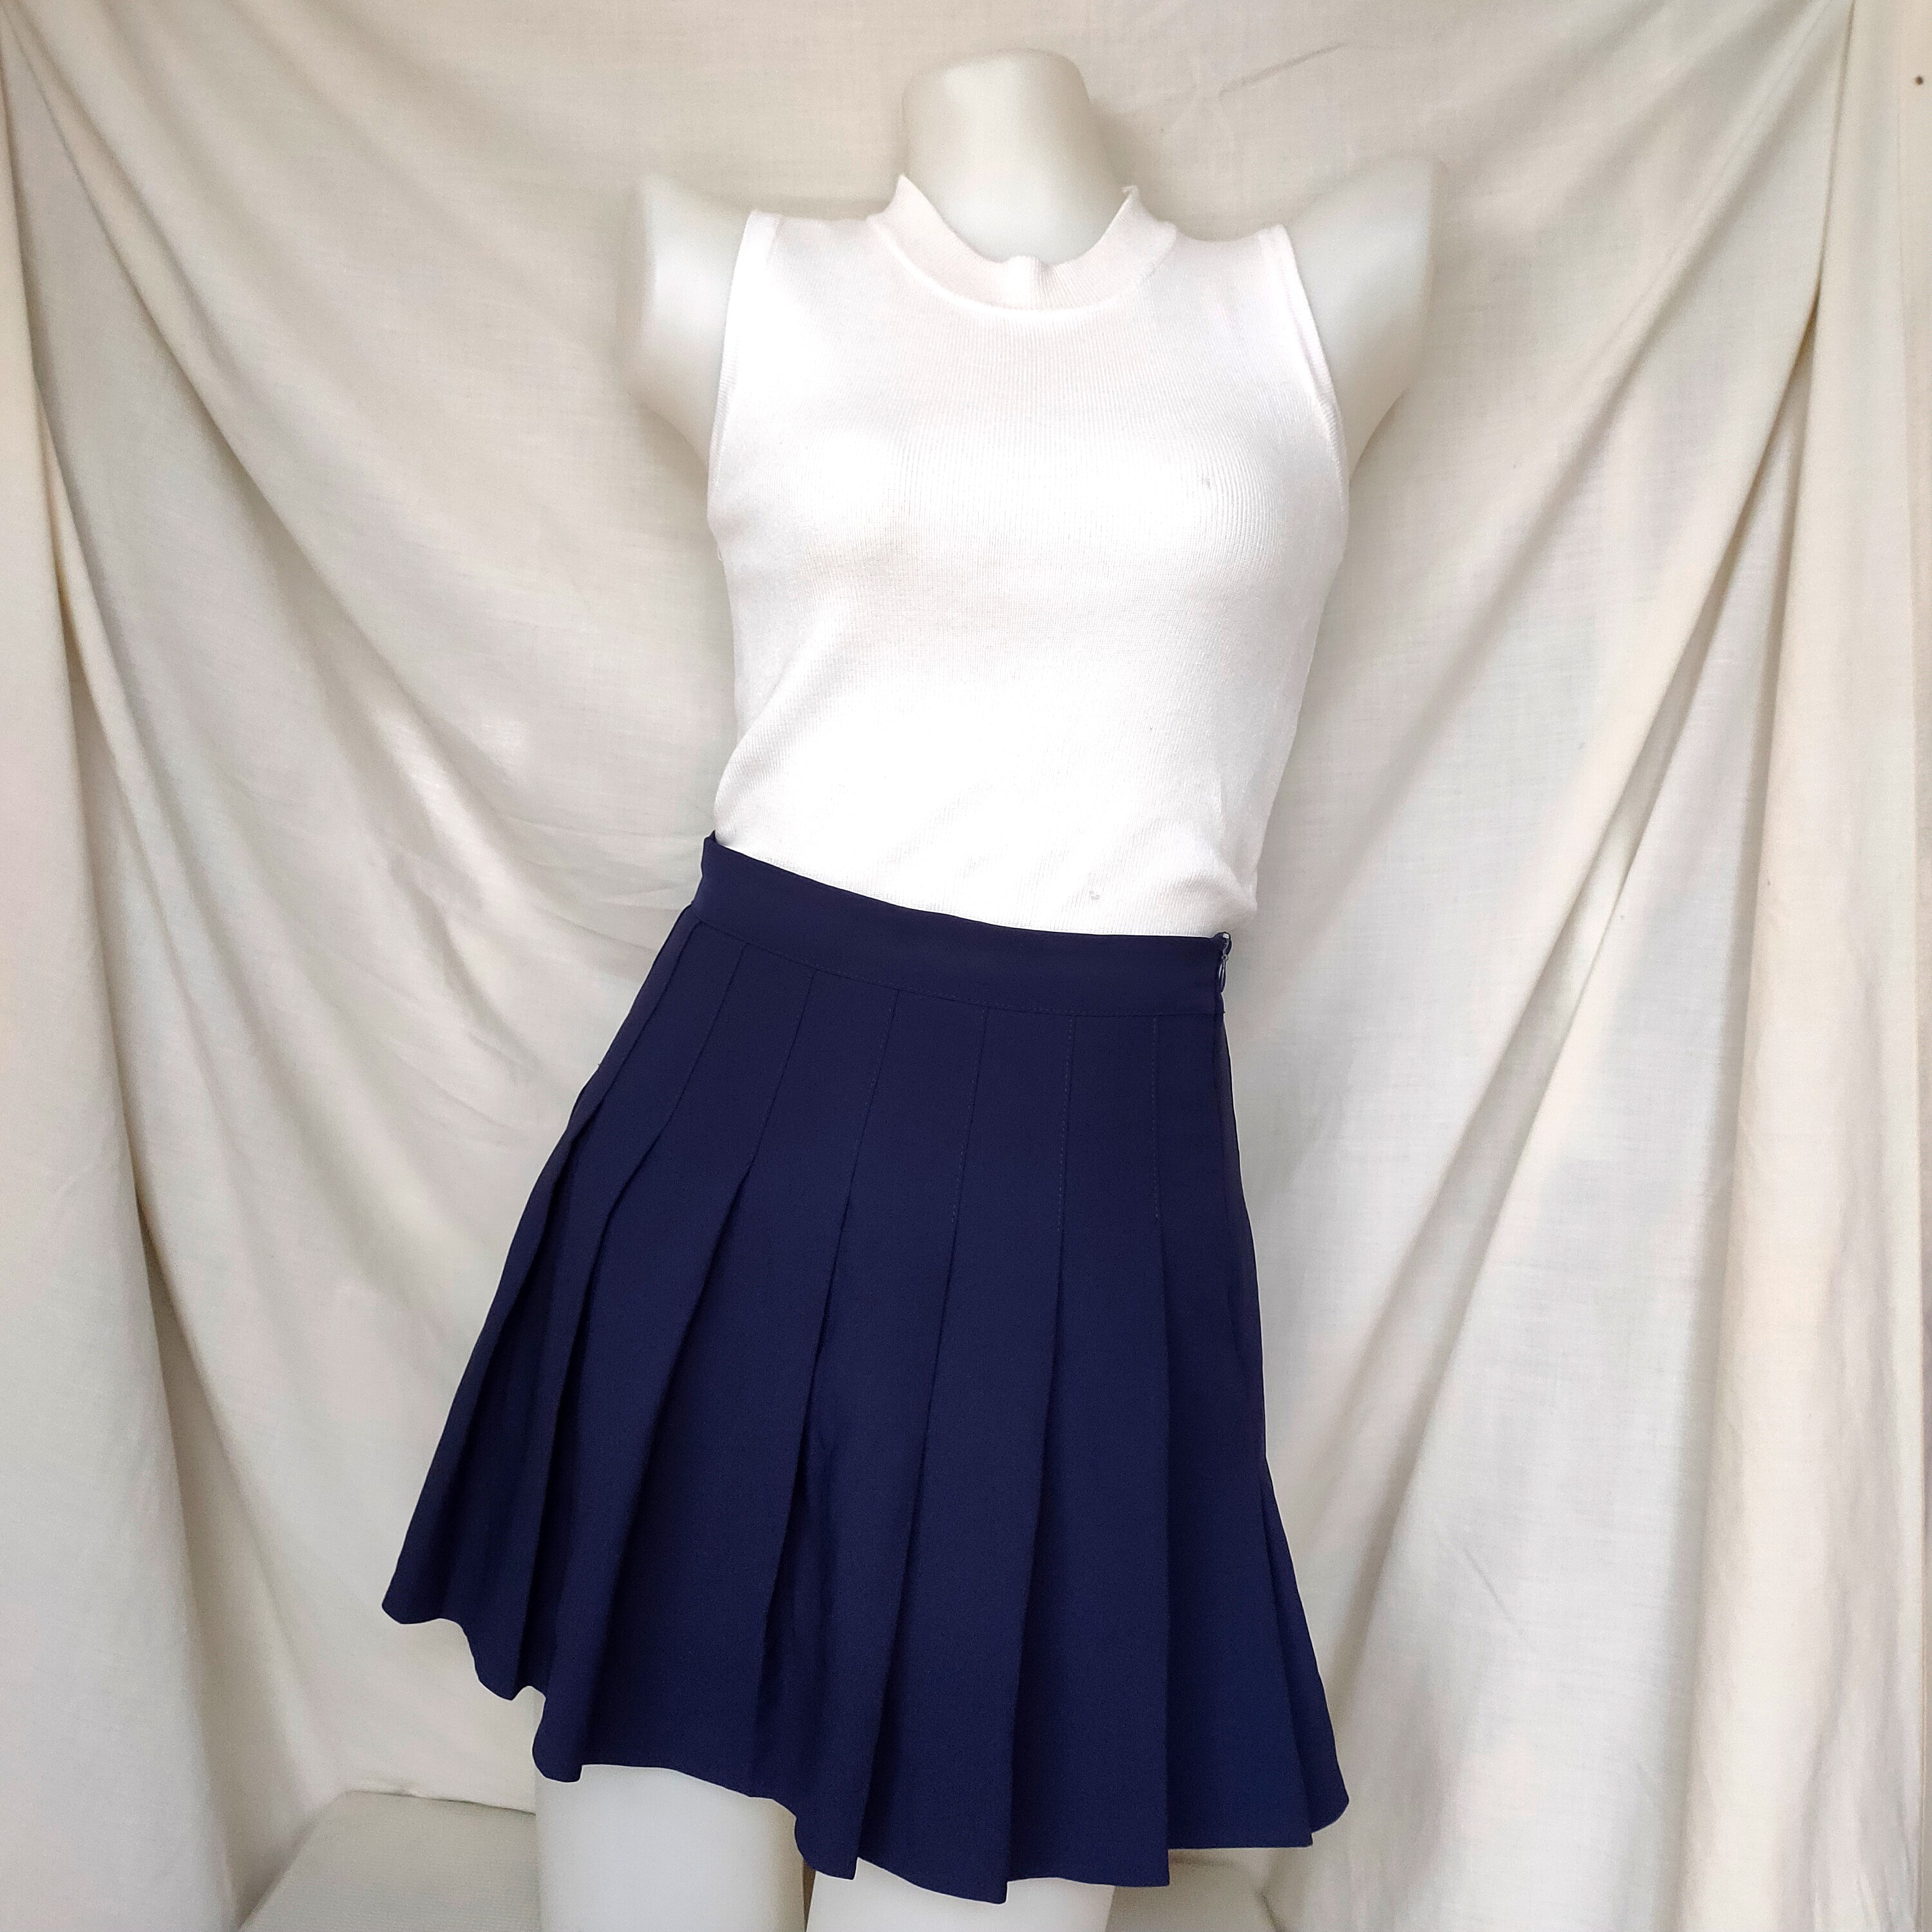 Korean style pleated skirt in navy blue (Size 26-27), Women's Fashion,  Bottoms, Skirts on Carousell